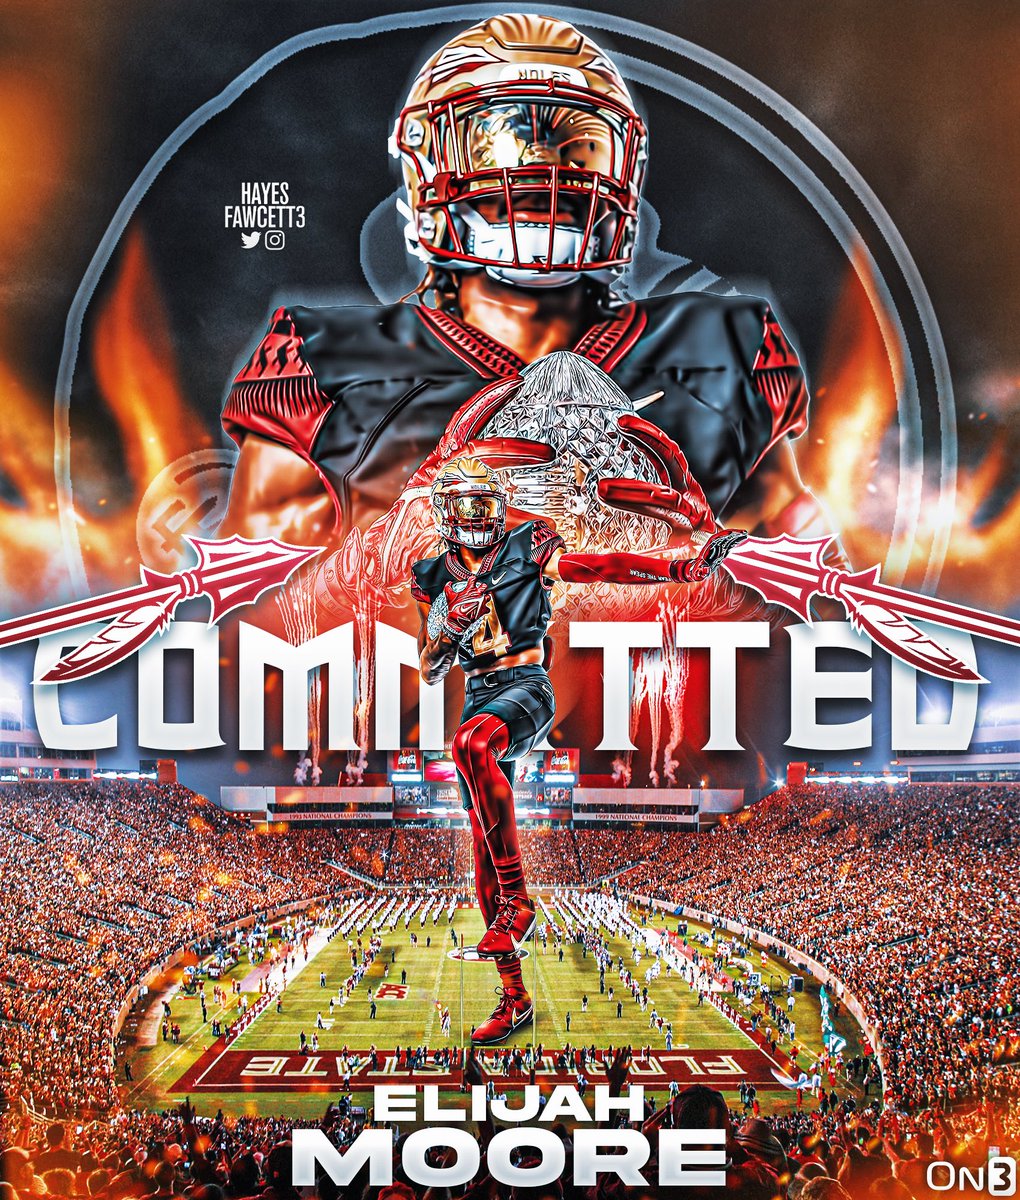 BREAKING: Four-Star WR Elijah Moore tells me he has Committed to Florida State! The 6’4 207 WR from Olney, MD chose the Seminoles over Ohio State, Maryland, & others “I’M IN TALLAHASSEE, FSU, I’M WITH THE SEMINOLES!” on3.com/college/florid…